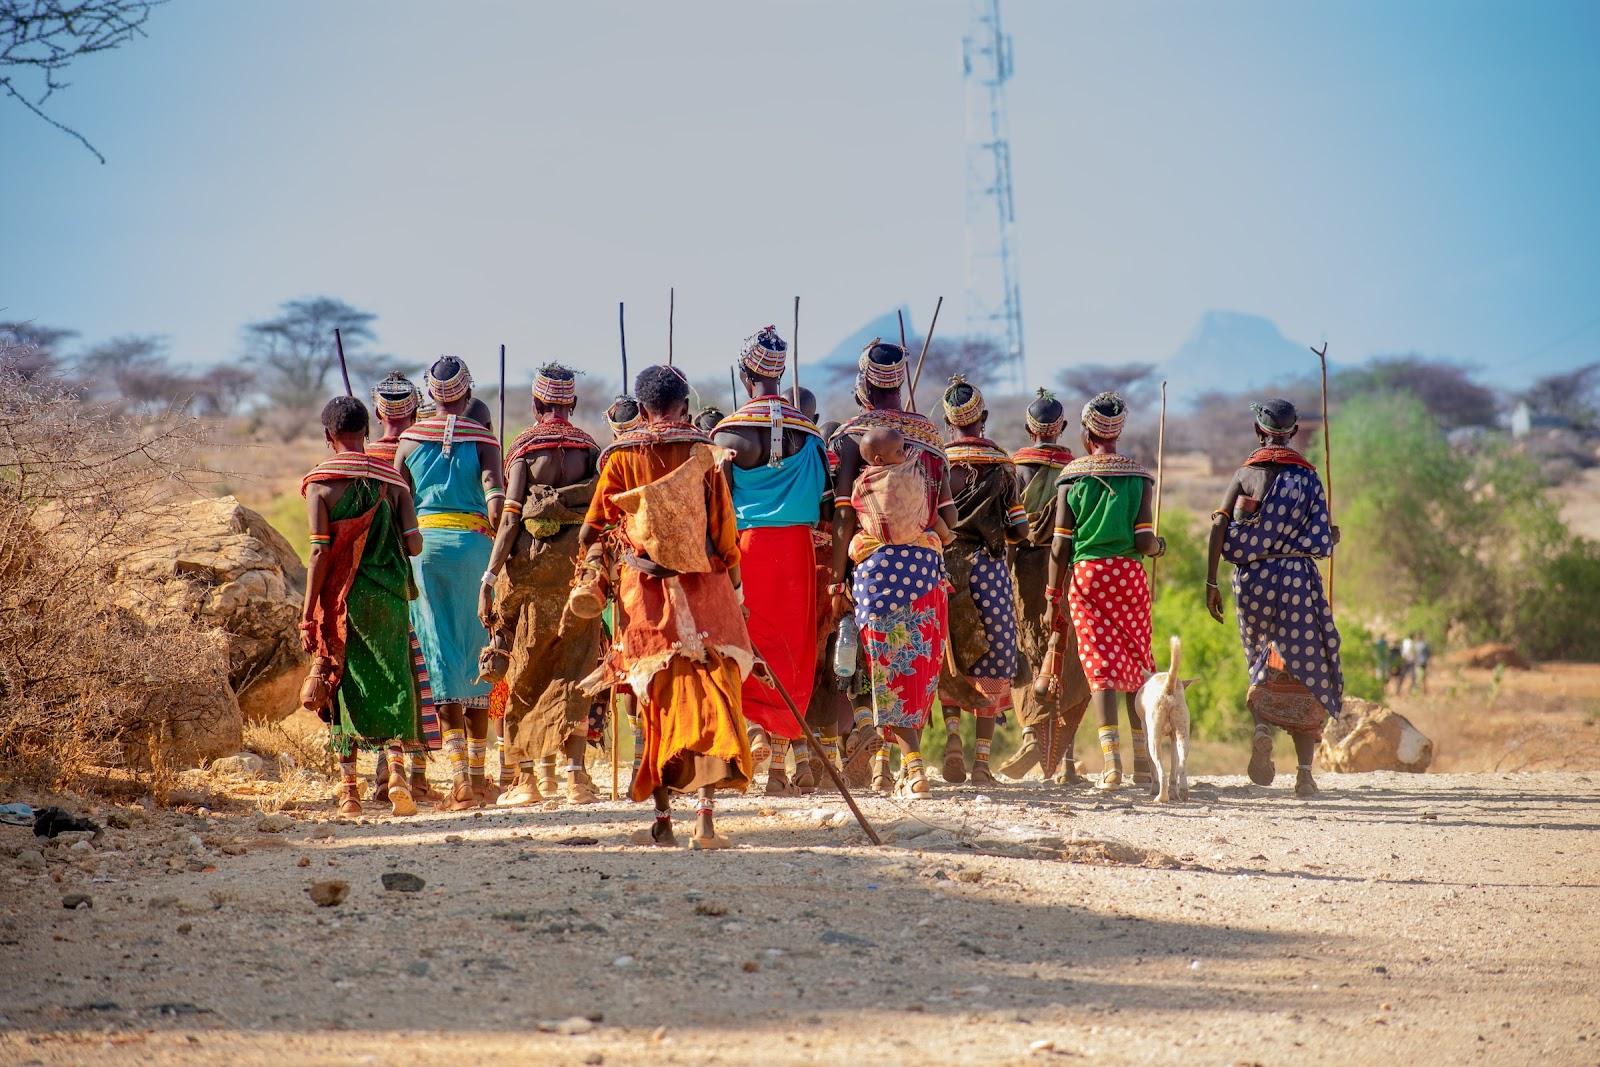 A group of Ugandan women walking, wearing colourful traditional clothing and carrying sticks.